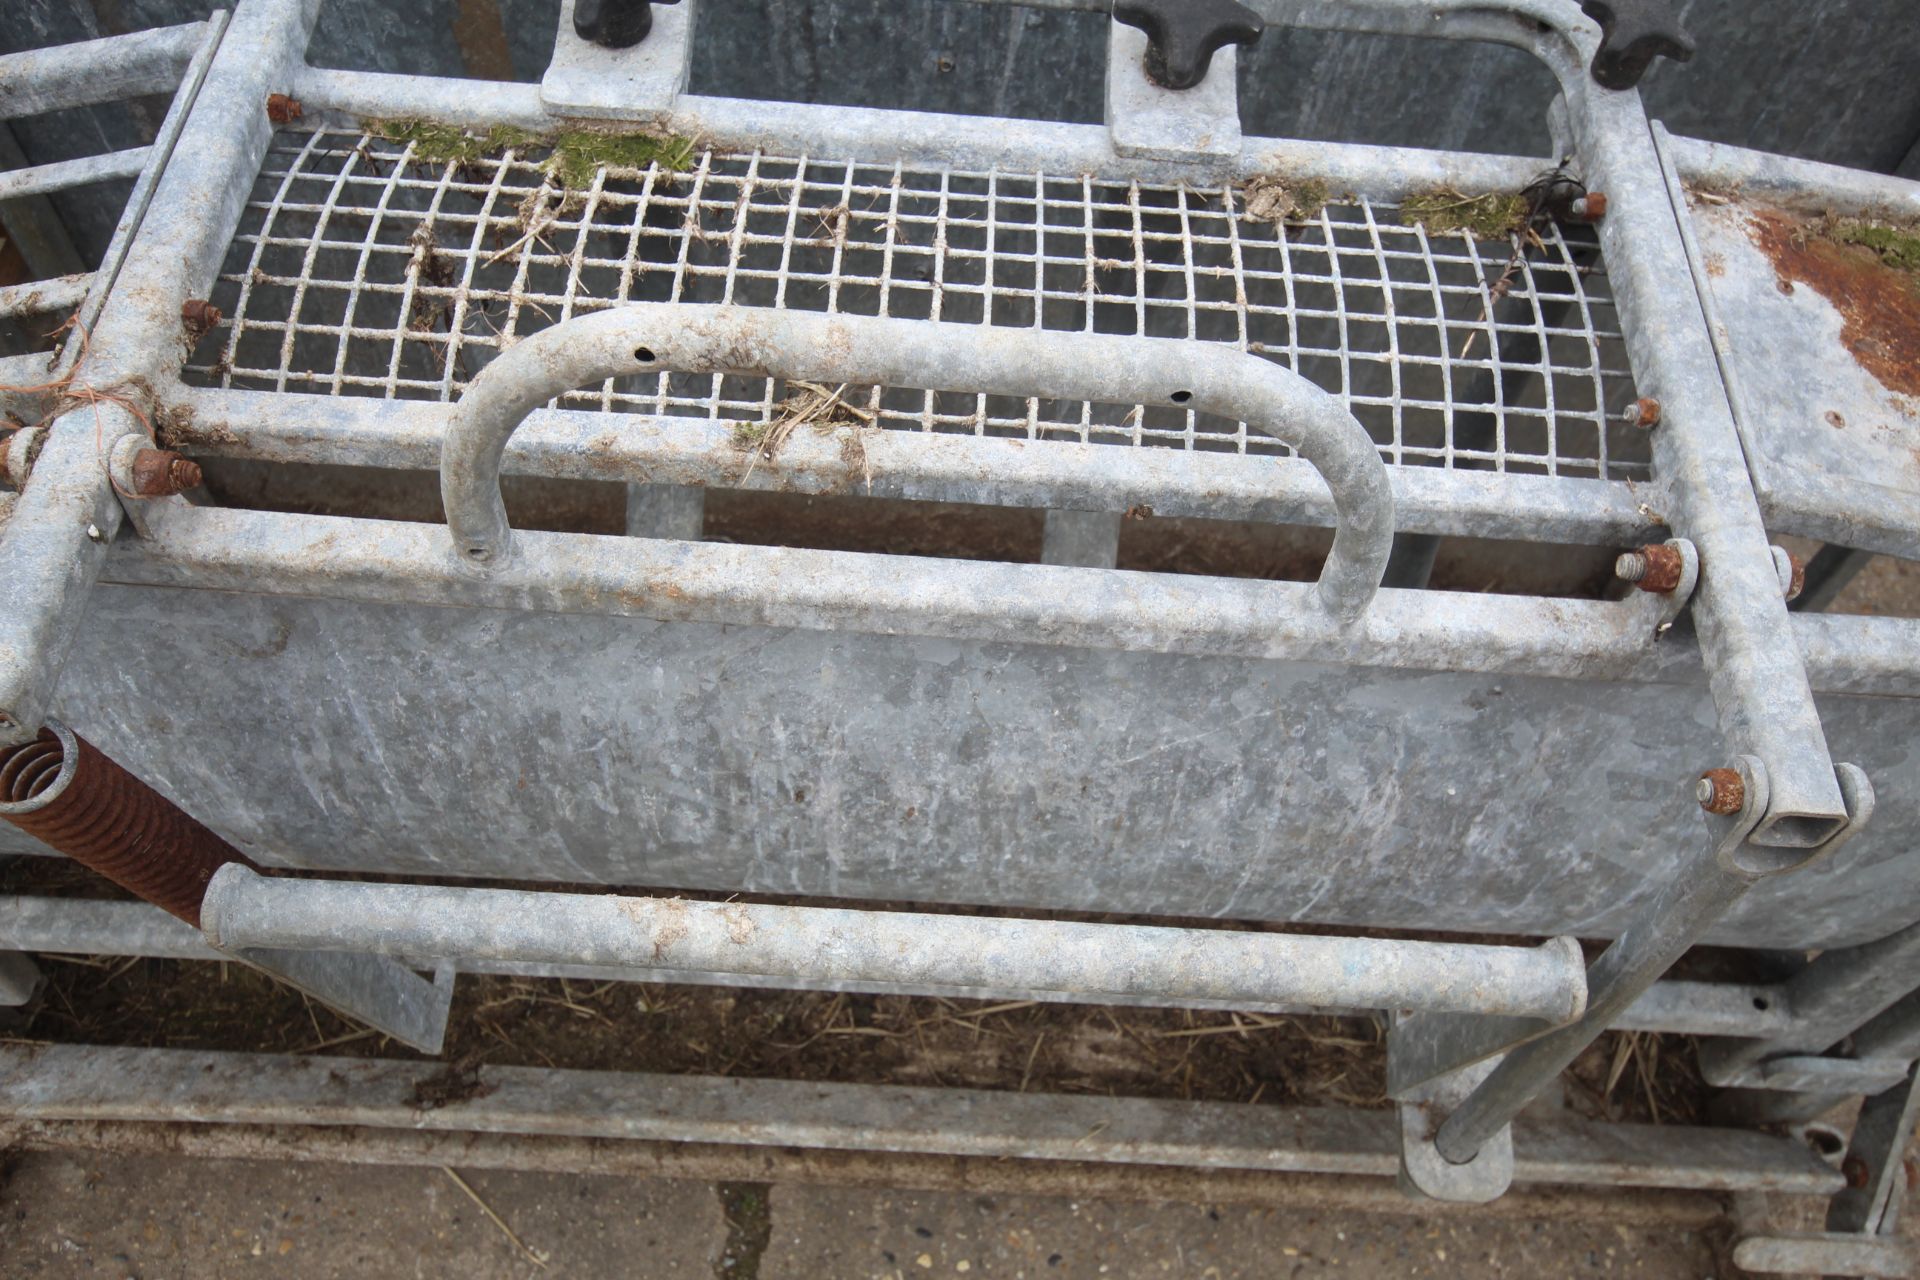 Sheep roll over crate. - Image 6 of 10